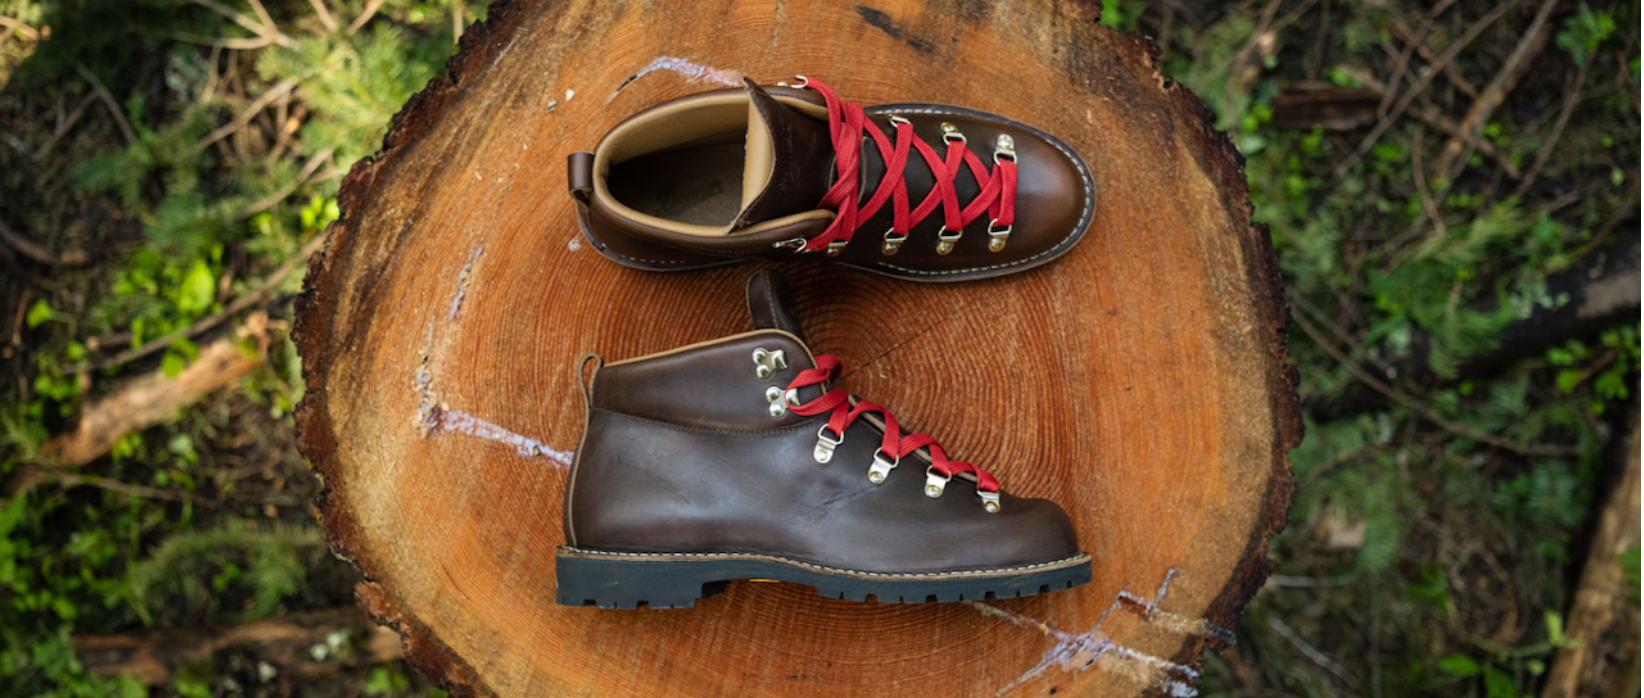 Danner Special Edition Footwear to celebrate 90 Years of Bootmaking